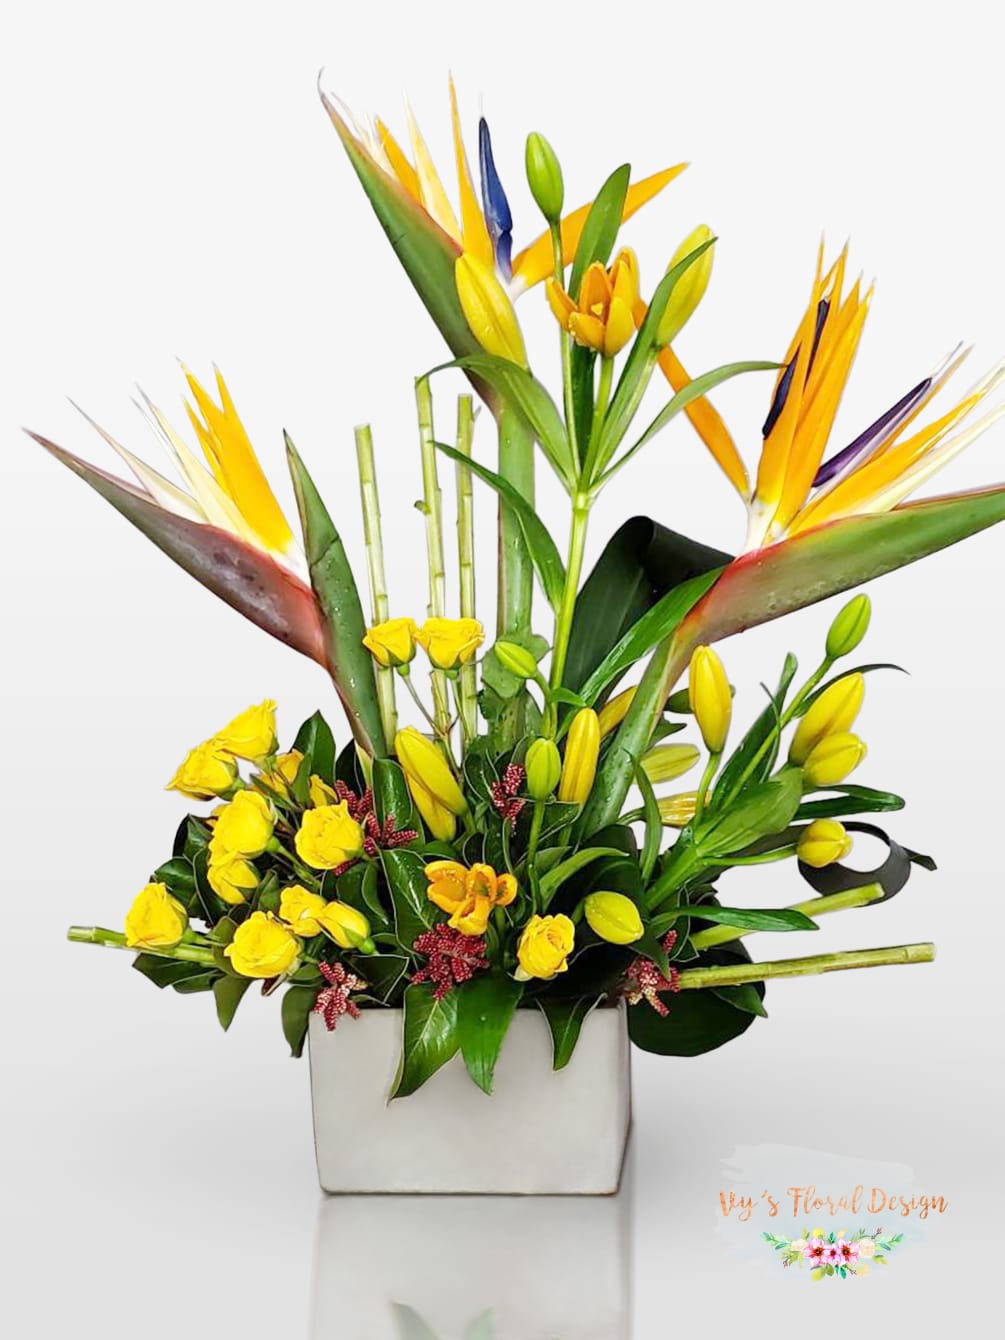 Tropical Paradise Creation, a vivid and lively arrangement featuring the captivating presence